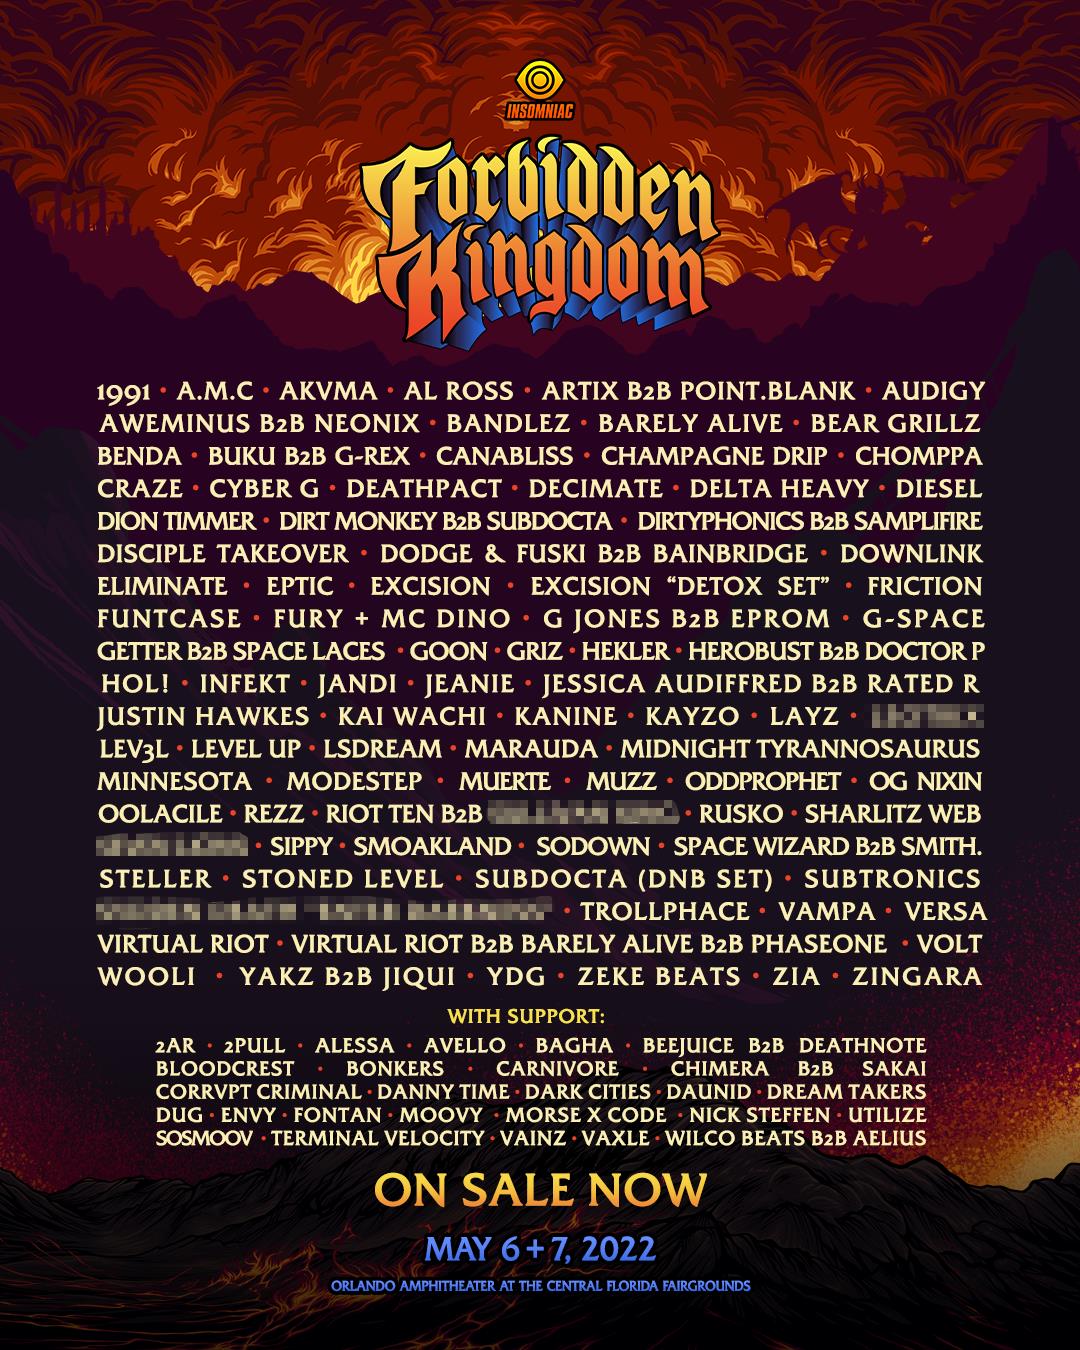 Buy Tickets to Forbidden Kingdom Music Festival 2022 in Orlando on May